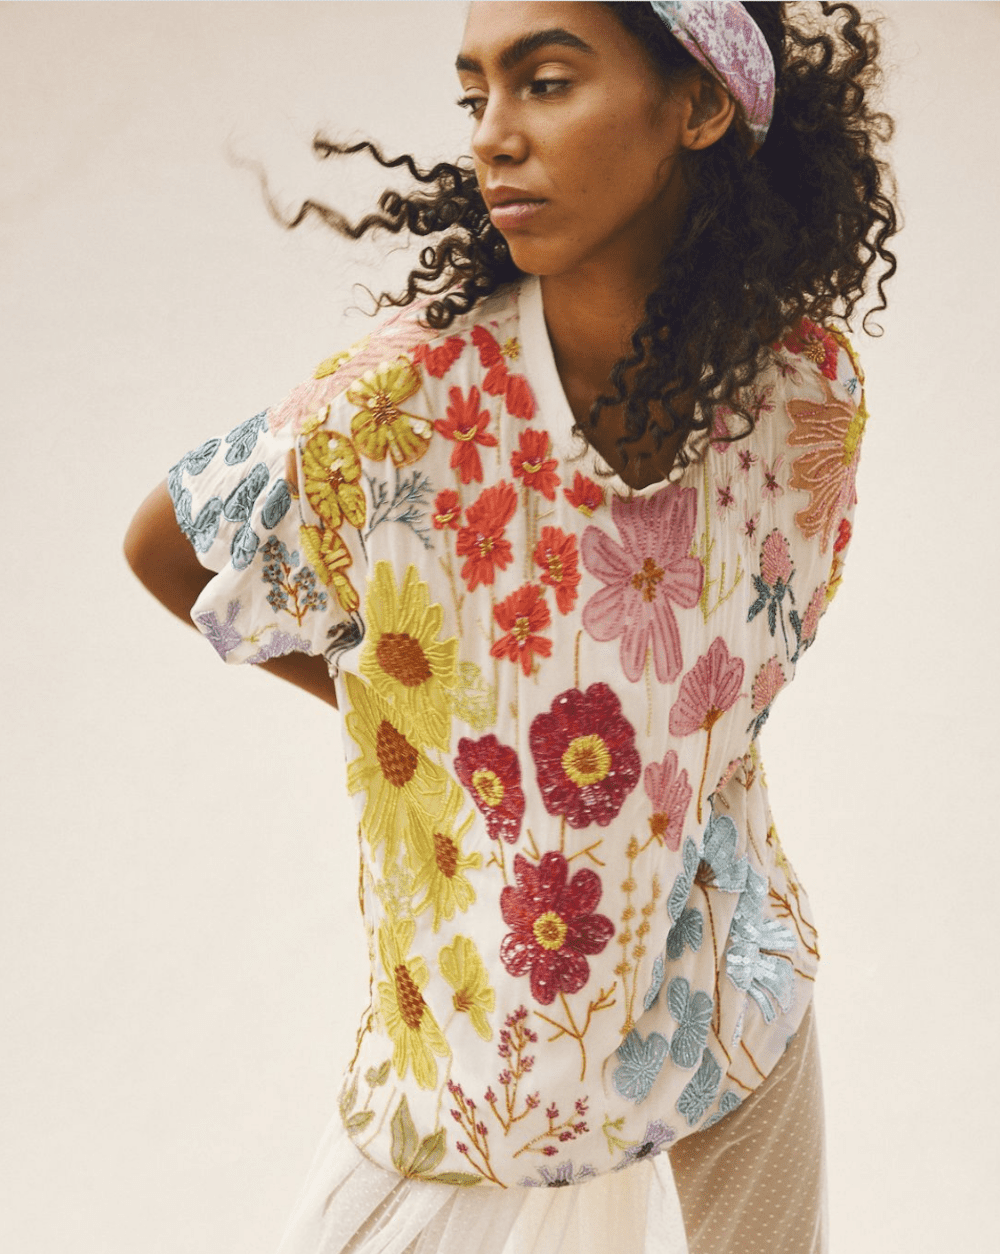 image of a black woman in a floral t-shirt and a colourful headband